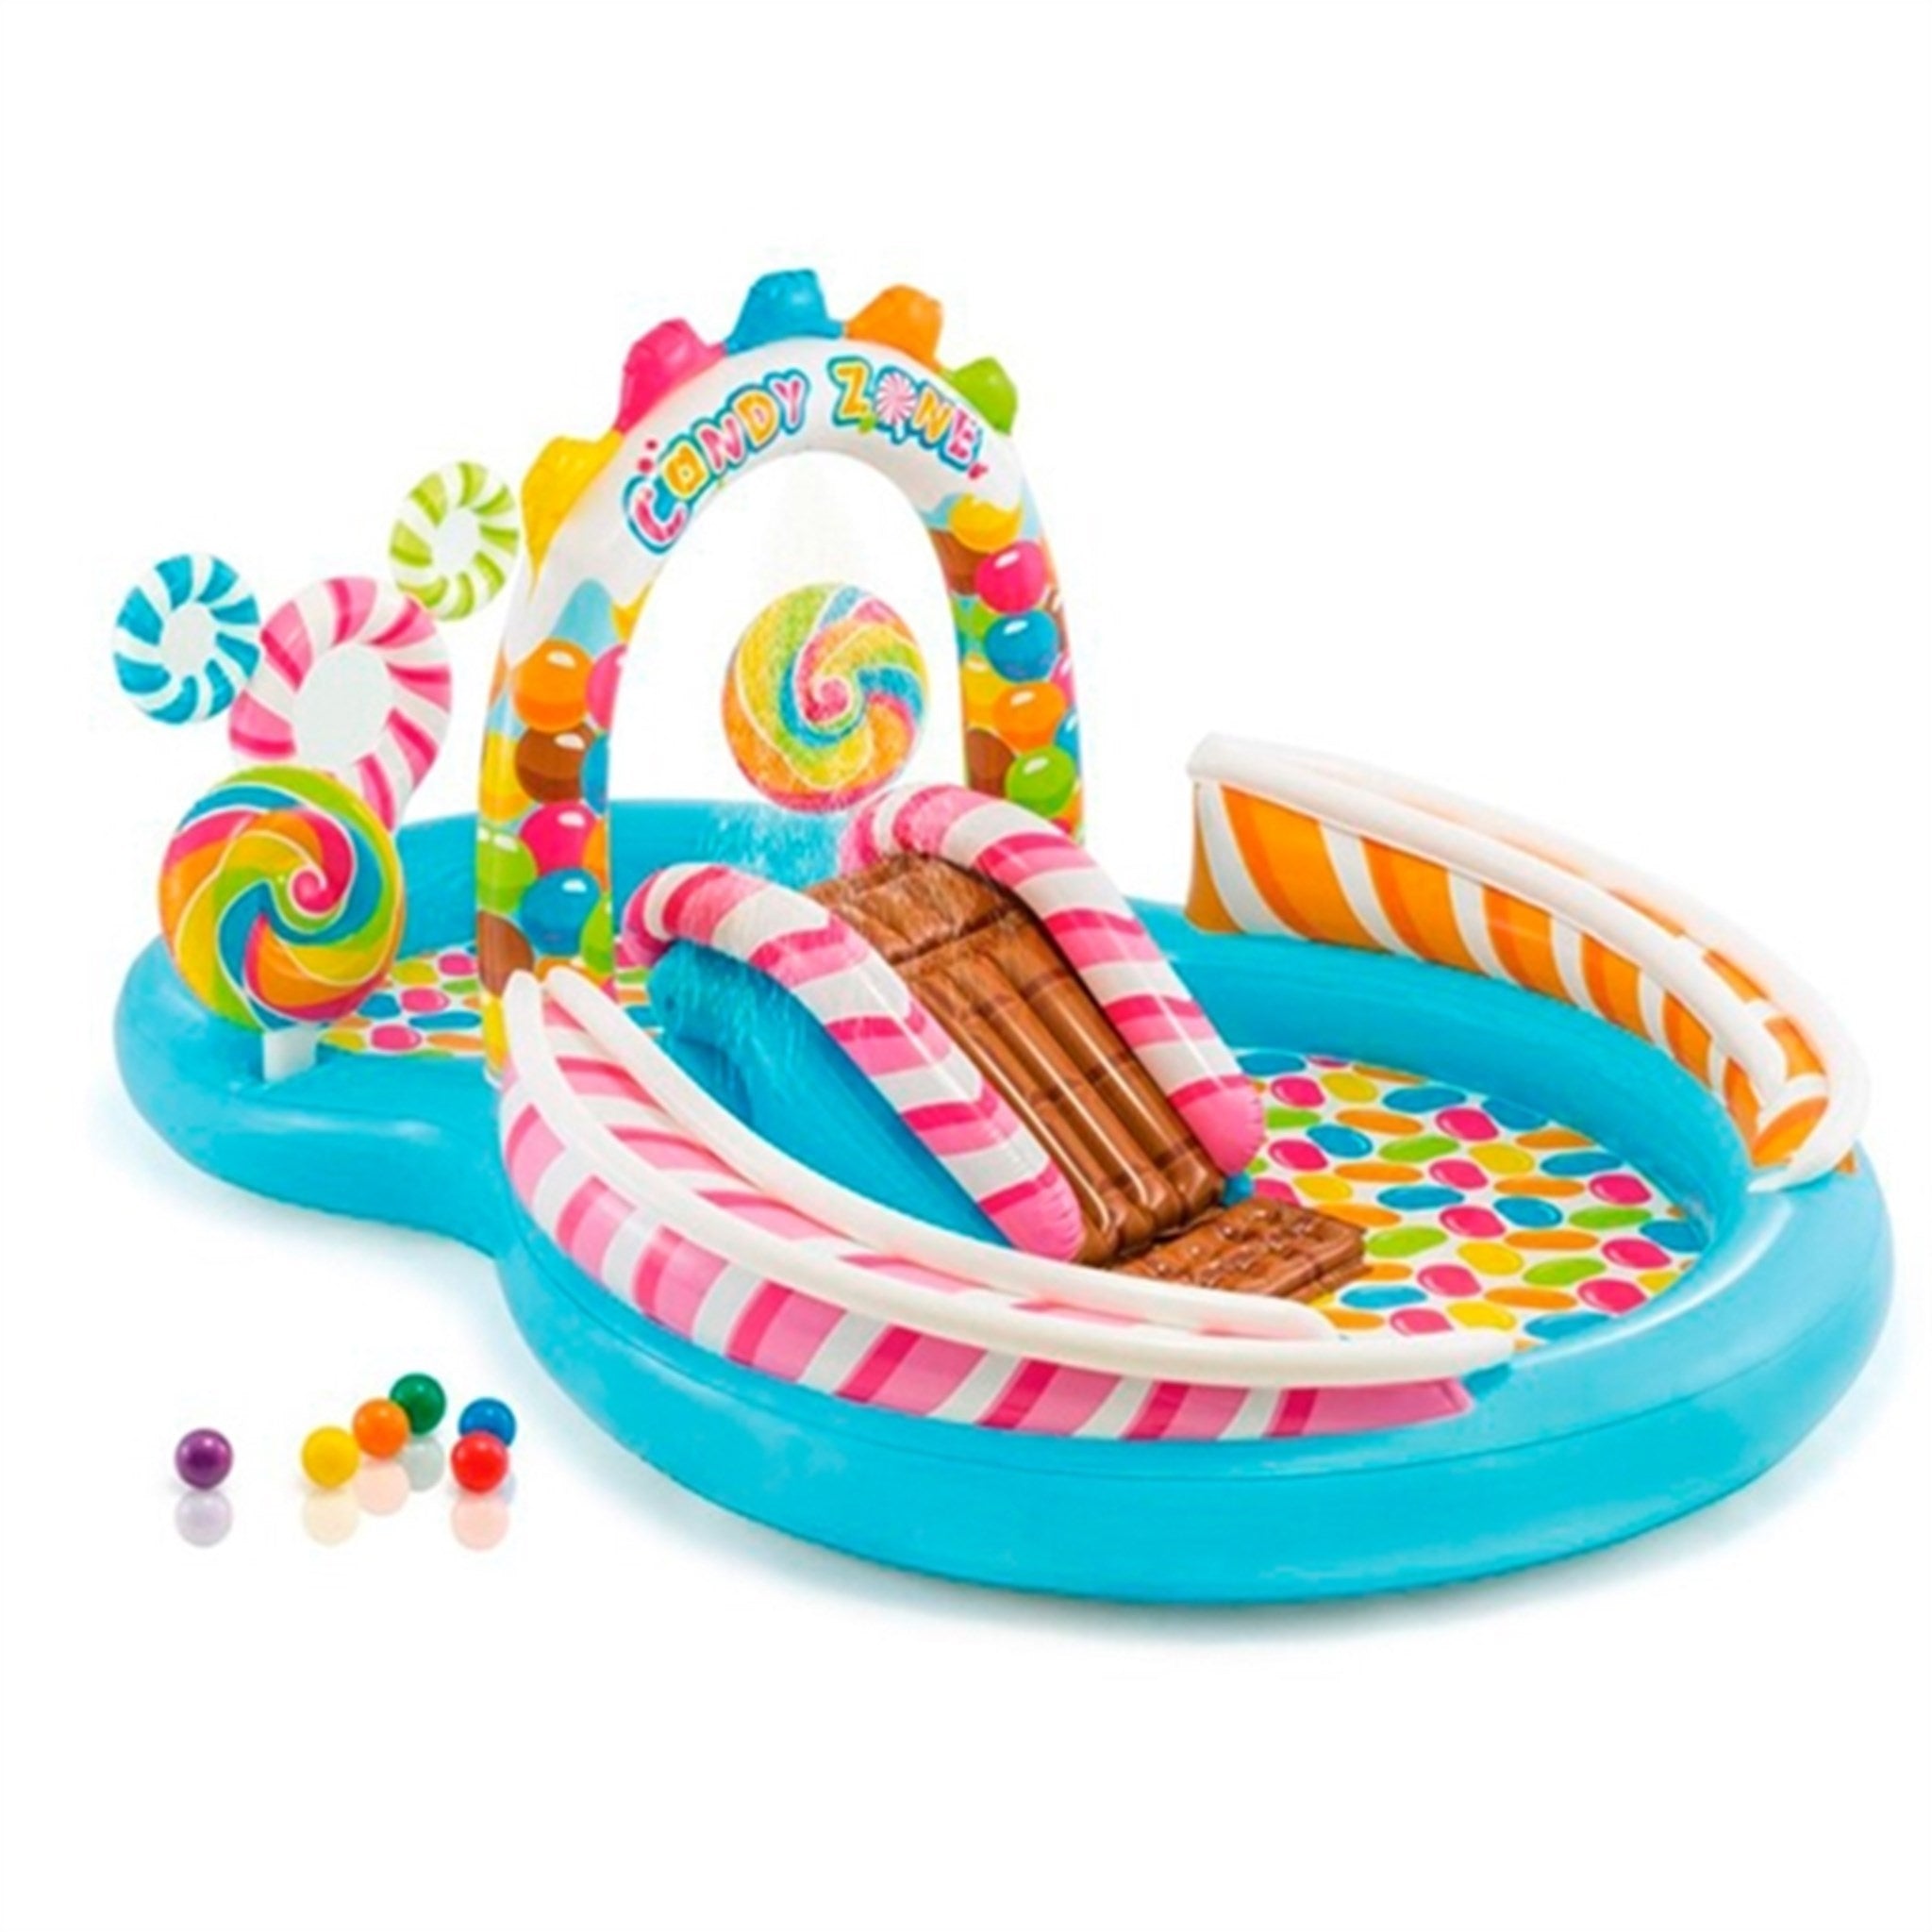 INTEX® Candy Zone Play Center